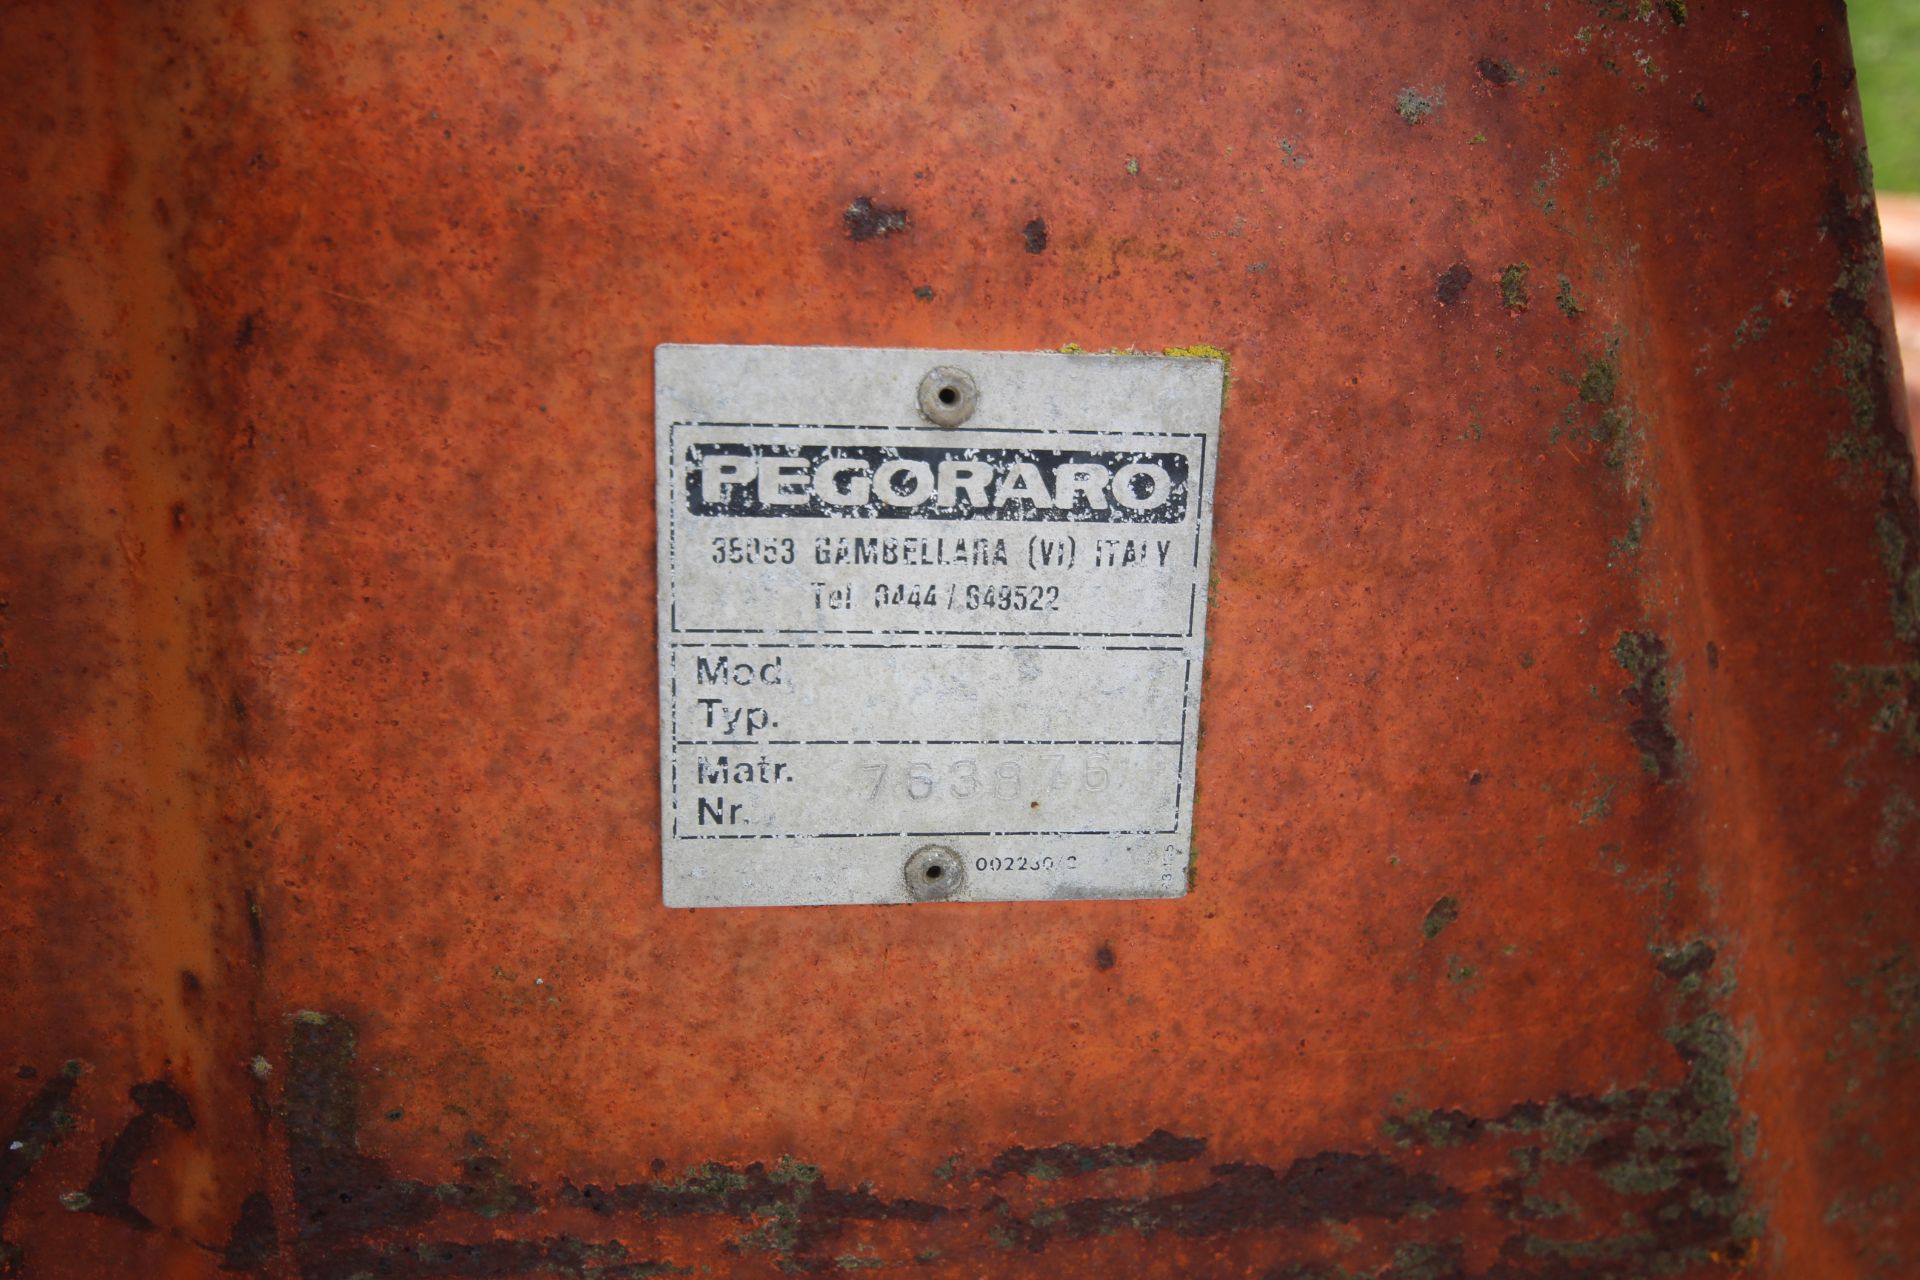 Westmac Pegararo 3m power harrow. Vendor reports owned since 2001 and used regularly. For sale due - Image 16 of 16